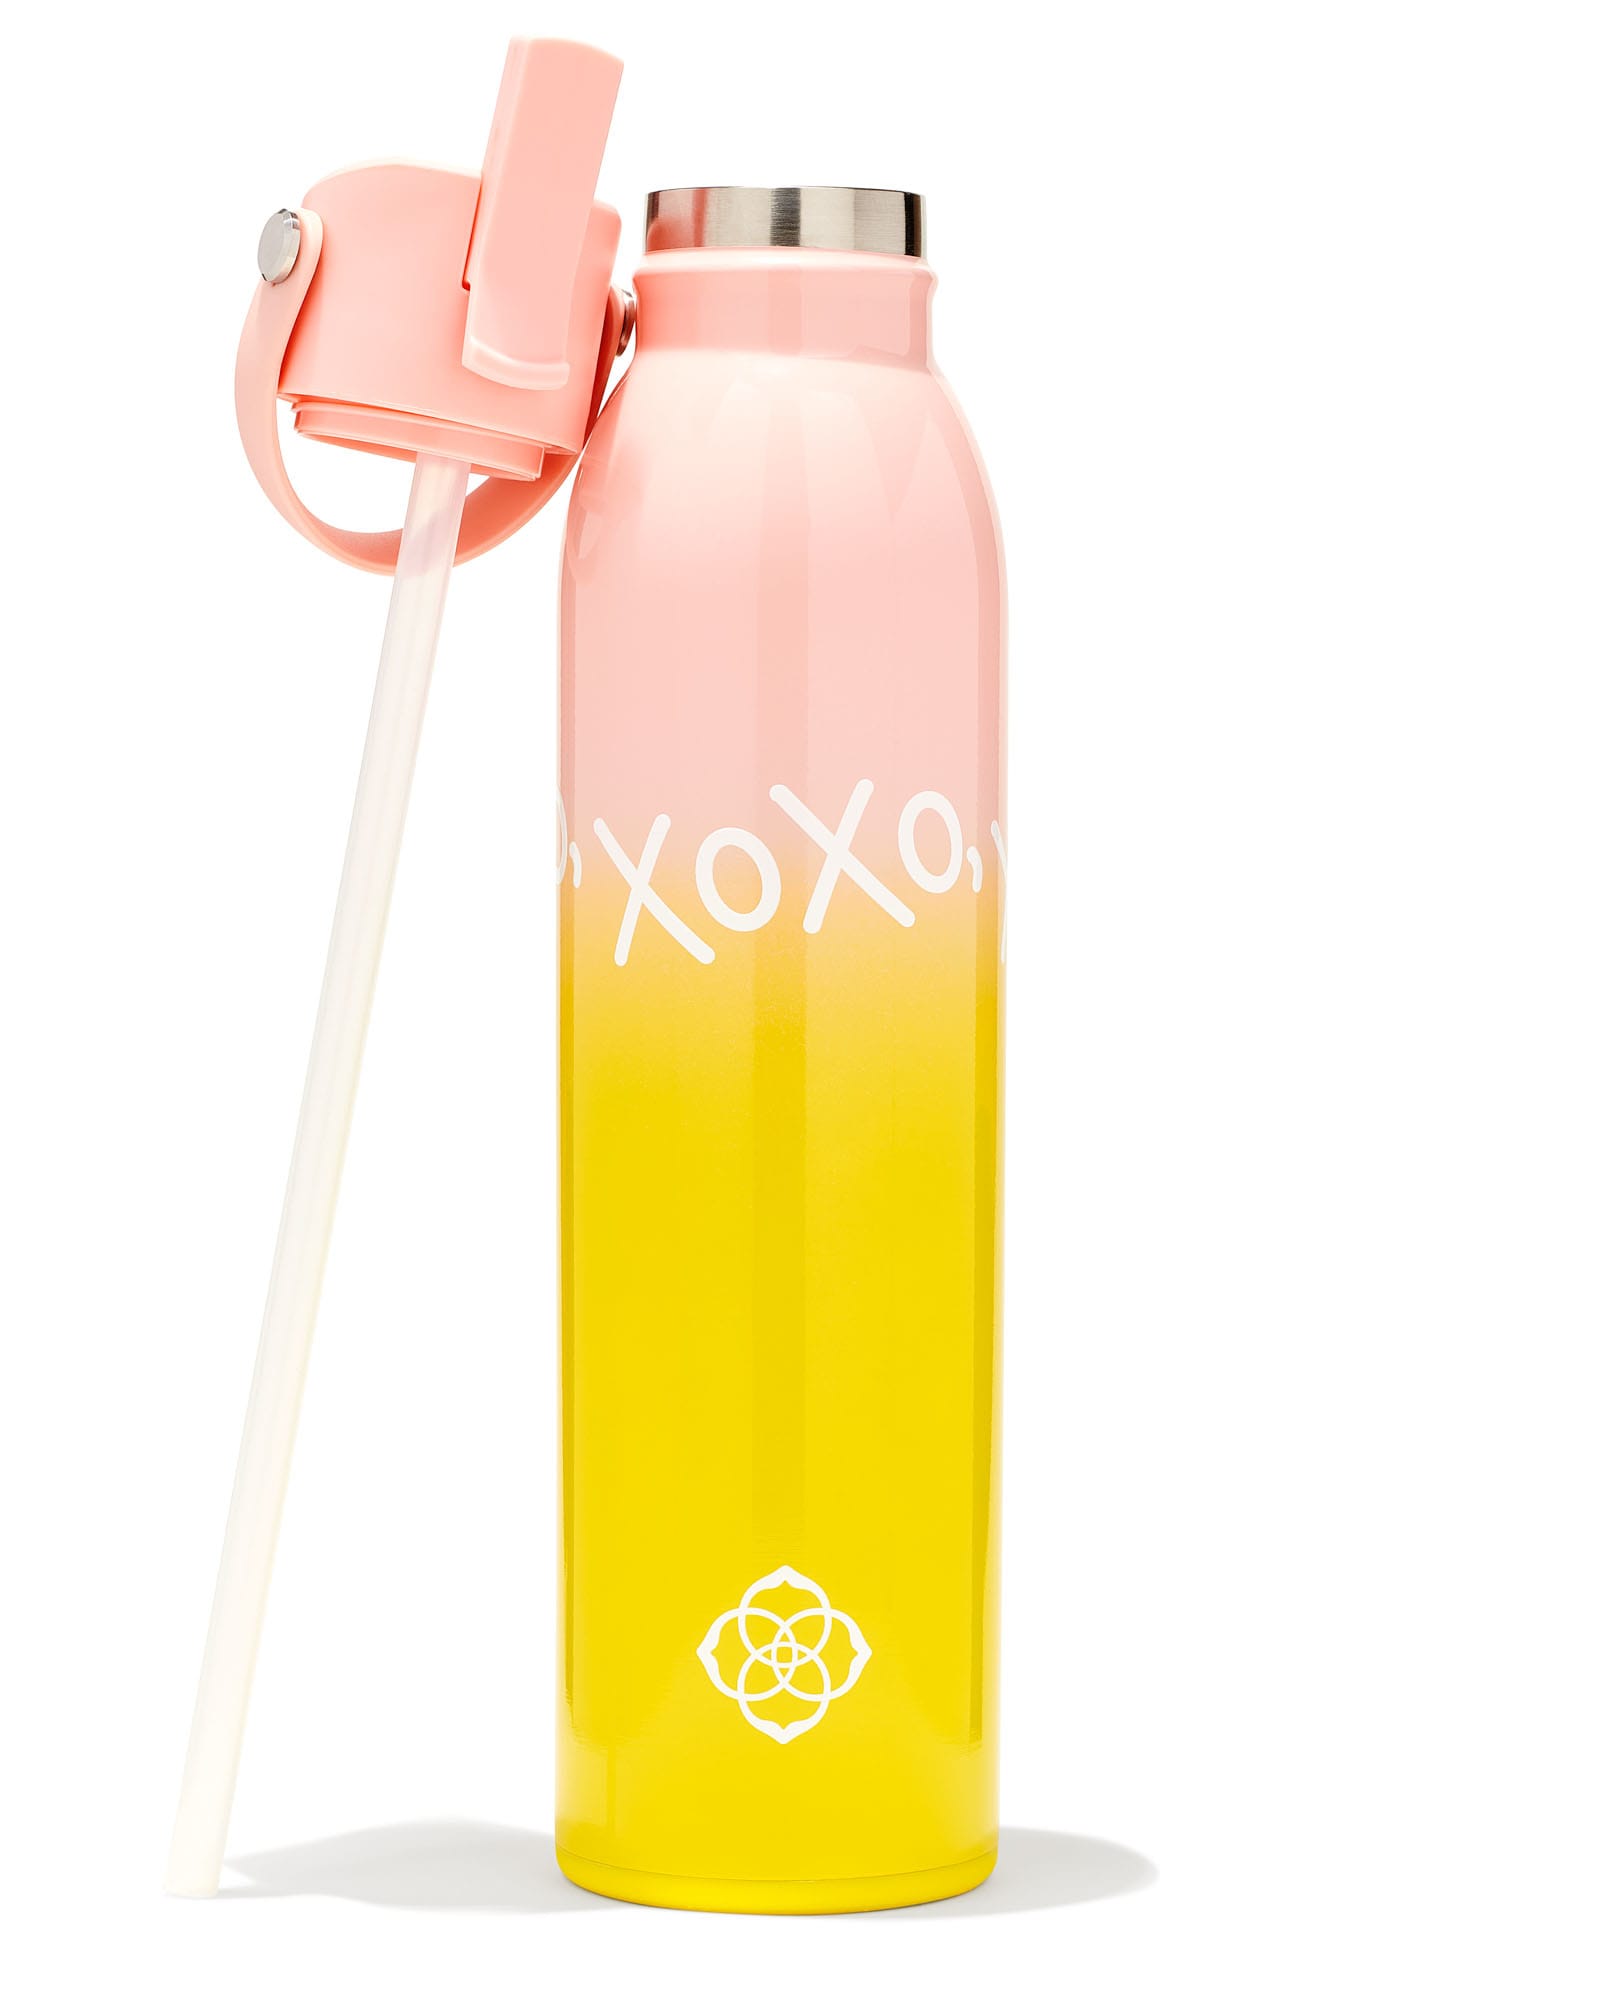 https://res.cloudinary.com/kendra-scott/image/upload/q_auto,f_auto,dpr_2/w_800,c_fit/Catalogs/kendrascott/2_3_23_GWP/kendra-scott-xoxo-water-bottle-stainless-steel-pink-and-yellow-ombre-01.jpeg